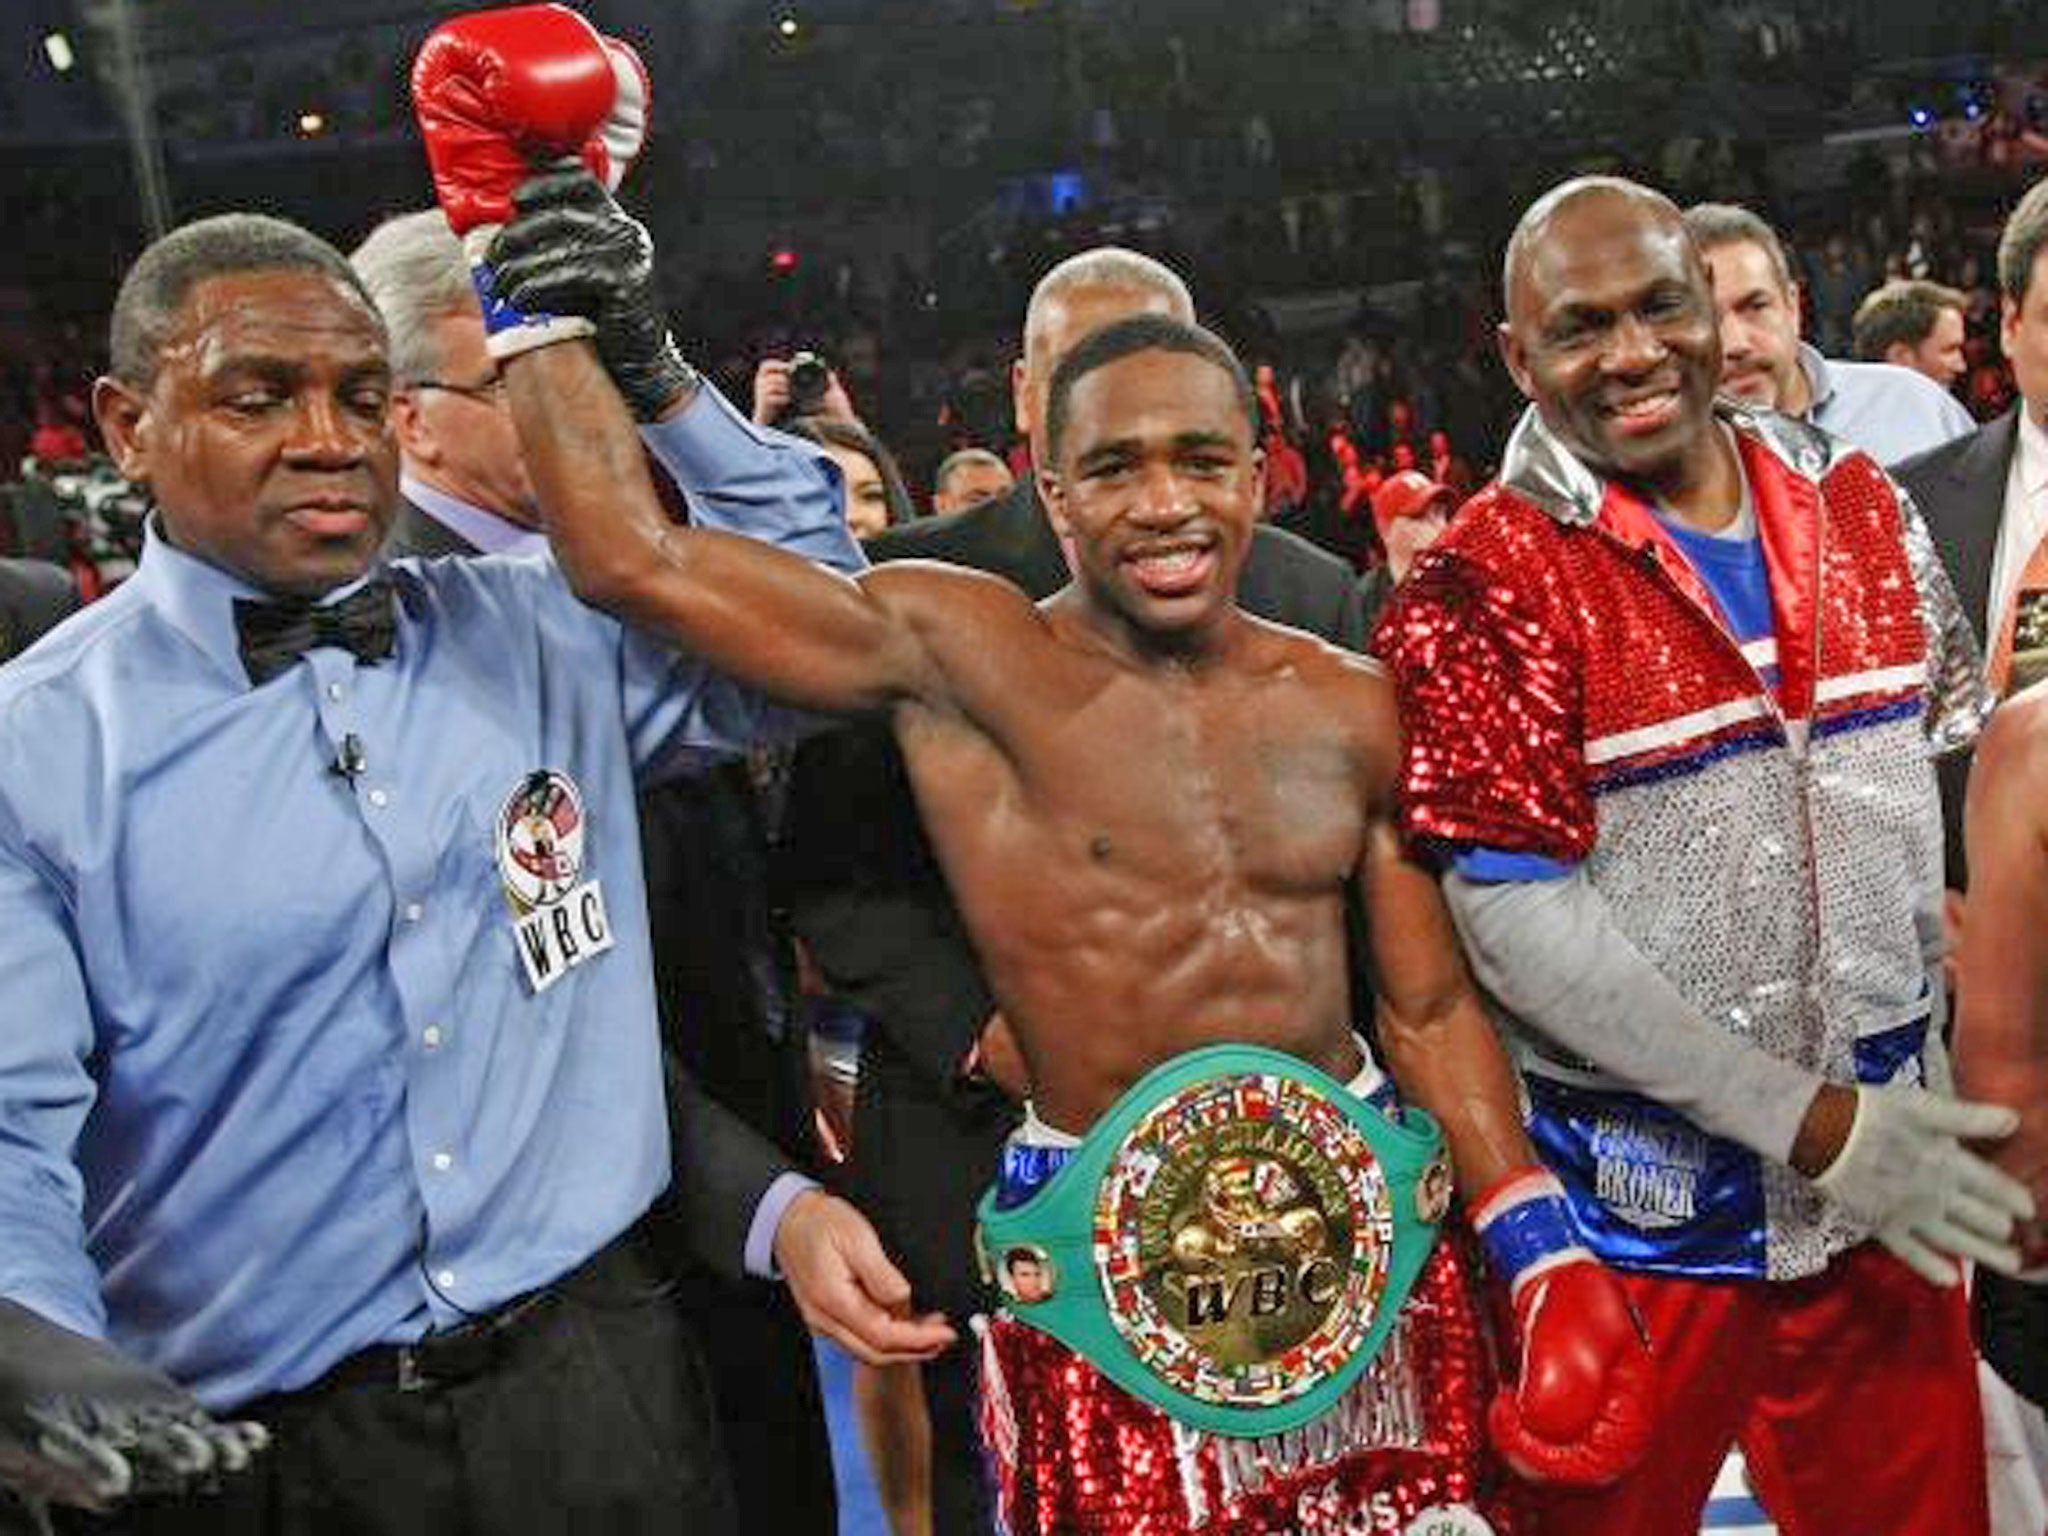 Adrien Broner celebrates after beating Gavin Rees of Britain in their WBC lightweight title match in Atlantic City